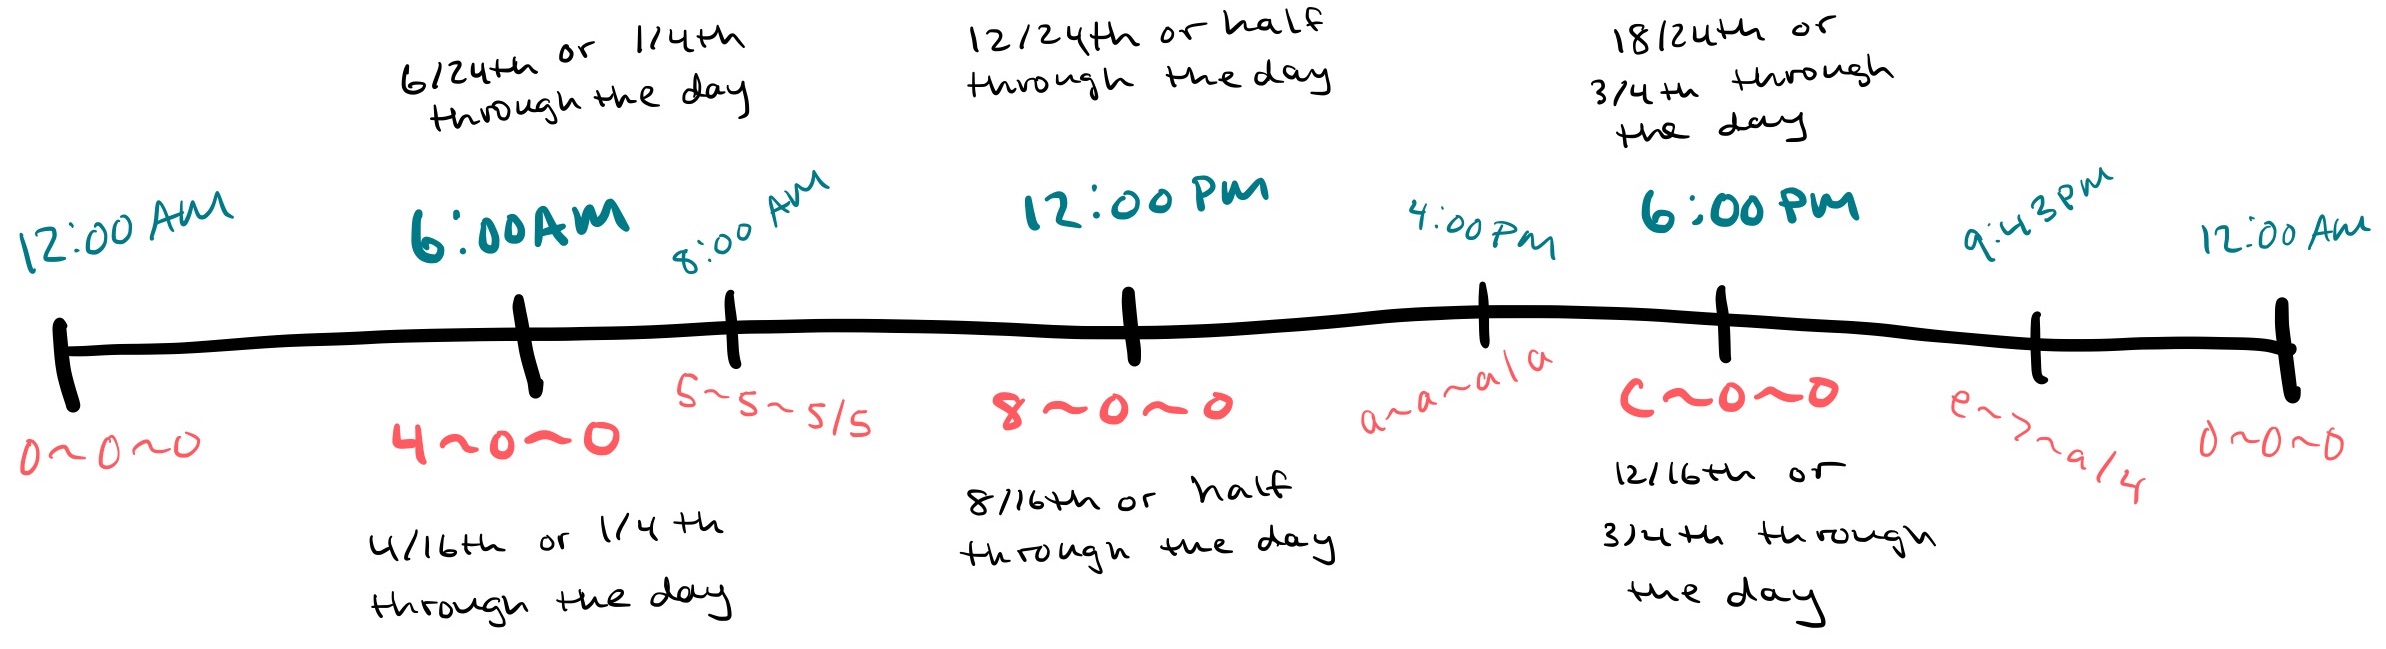 A diagram showing a timeline from 12:00AM to 12:00AM, with normal time at the top and Lightning Time at the bottom. For example, 12:00AM is 0~0~0 and 12:00PM is 8~0~0. 12:00PM is 12/24th or one half of a day, just as 8 is 8/16th or one half of a day.